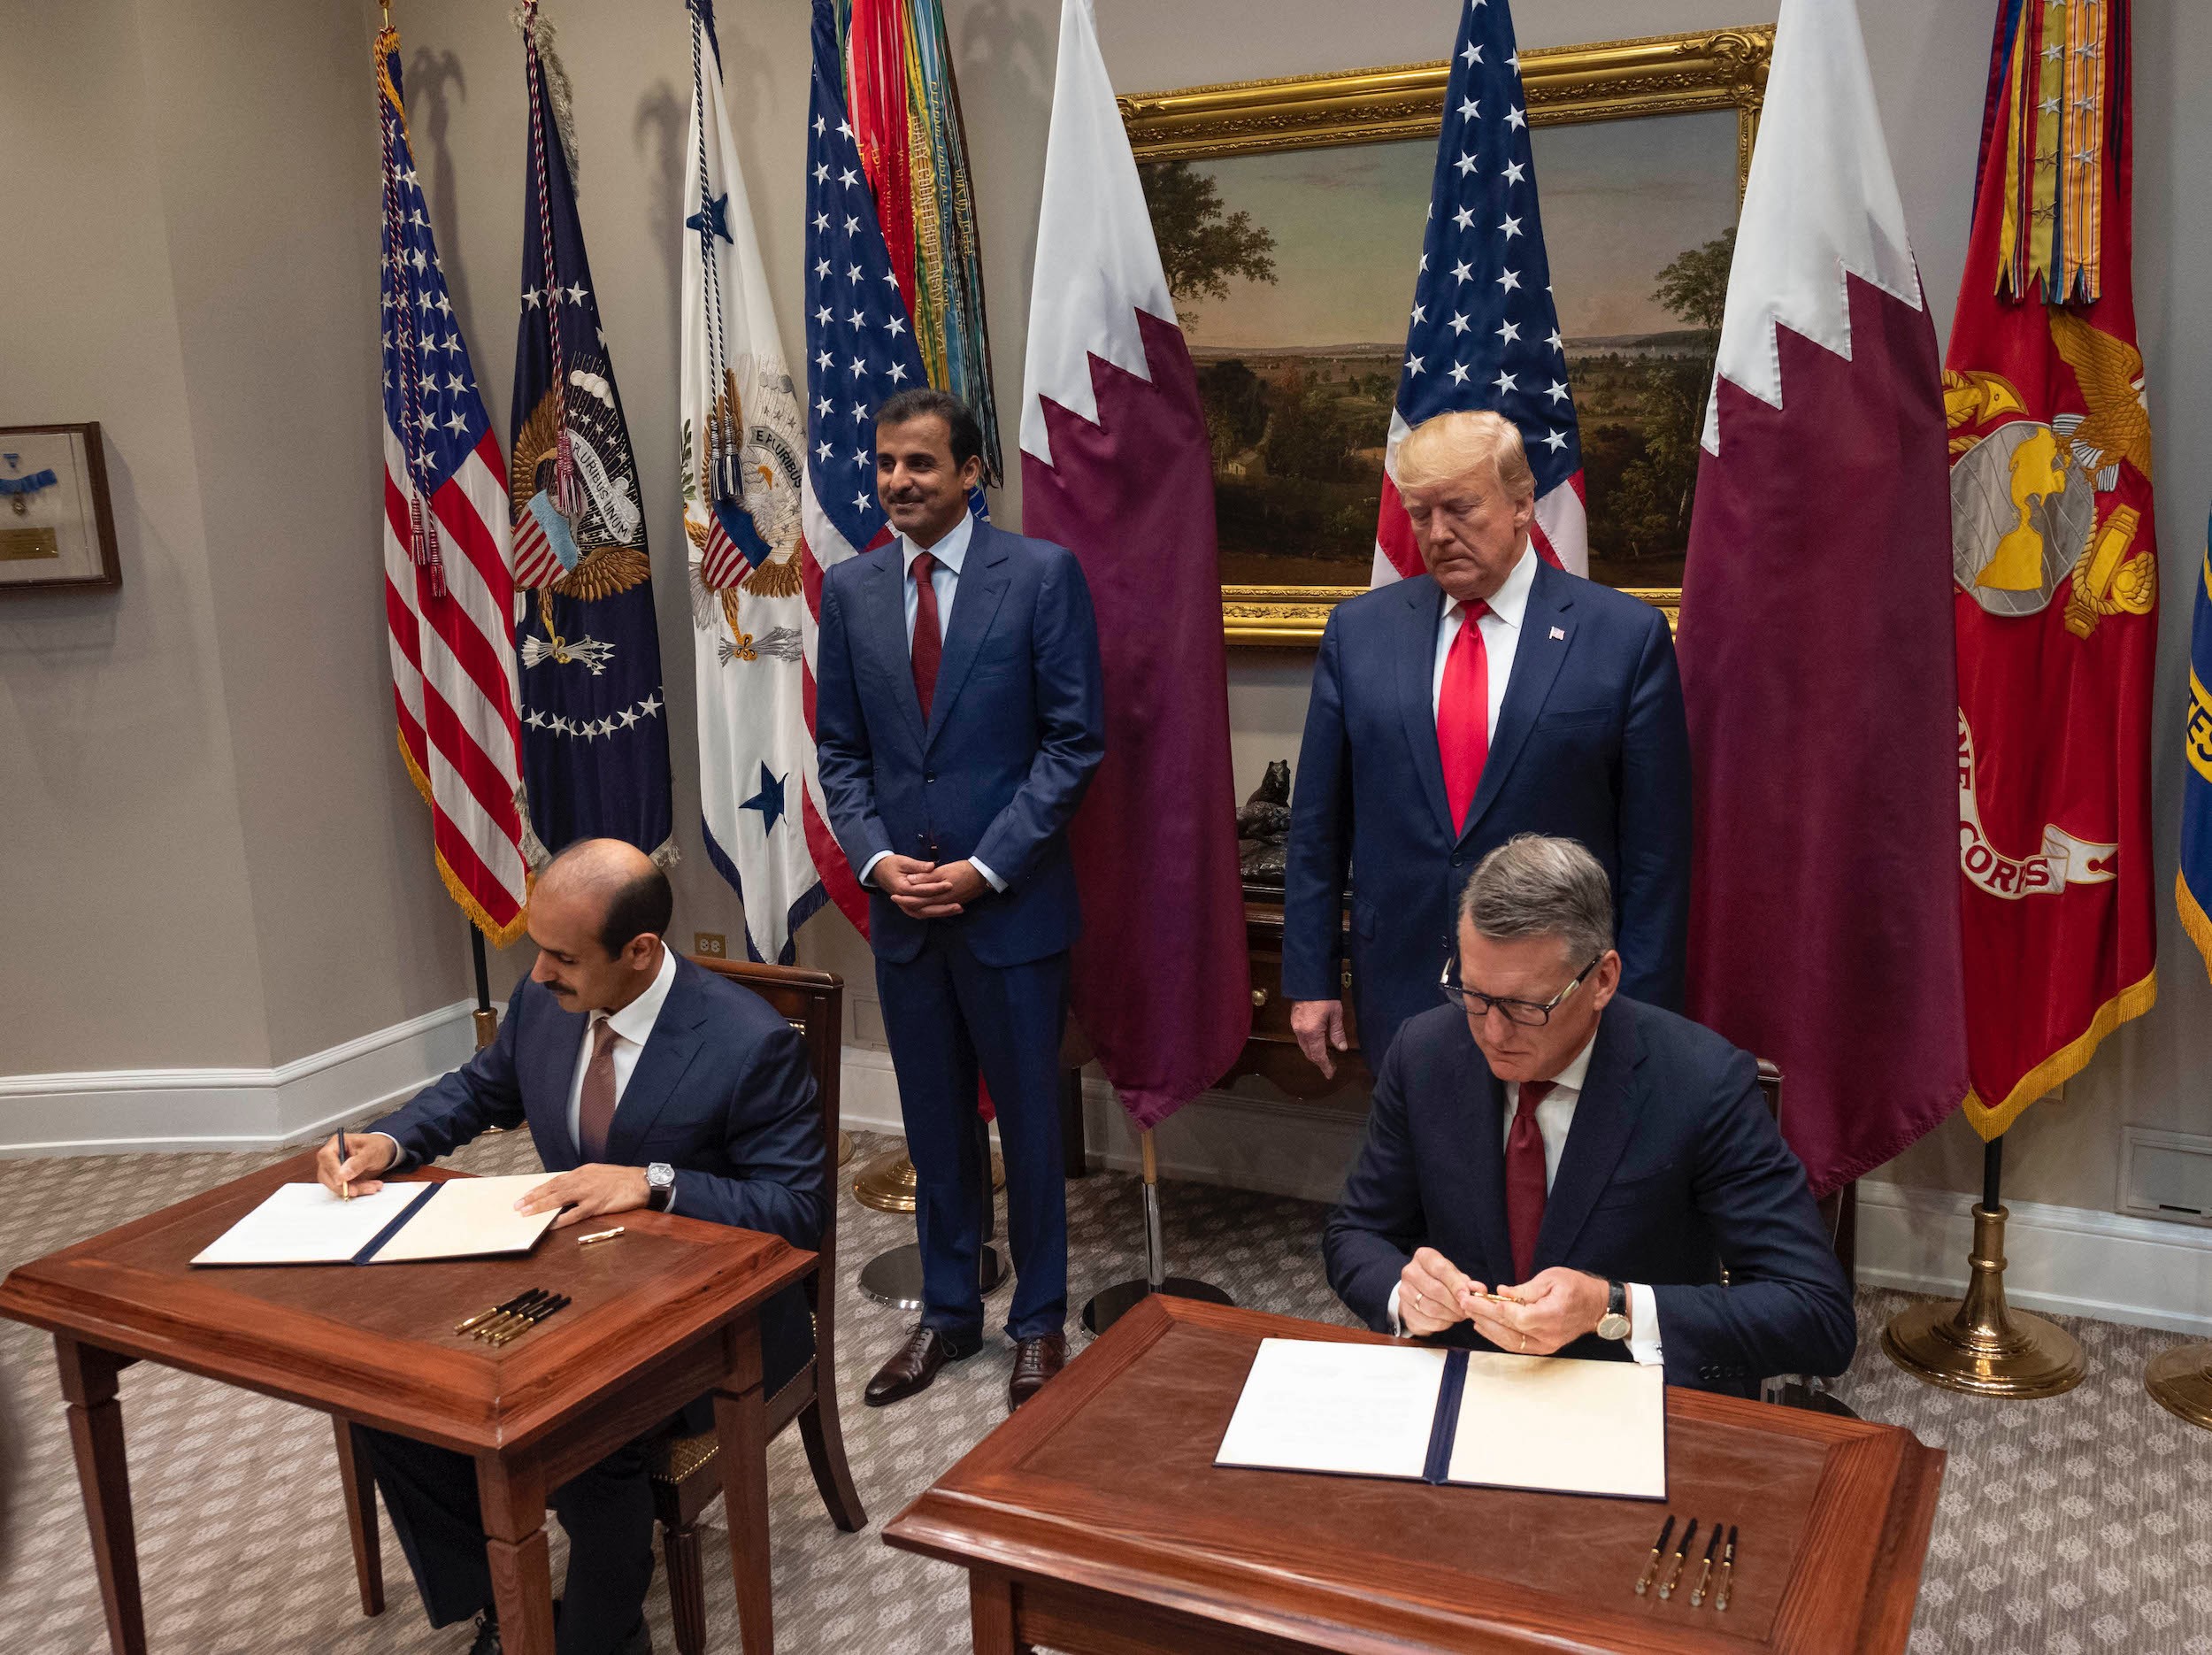 President Donald Trump and His Highness, Sheikh Tamim bin Hamad Al Thani, Amir of the State of Qatar, witness an agreement signed by Chevron Phillips Chemical President and CEO Mark Lashier and His Excellency Mr. Saad Sherida Al-Kaabi, Qatar’s Minister of State.